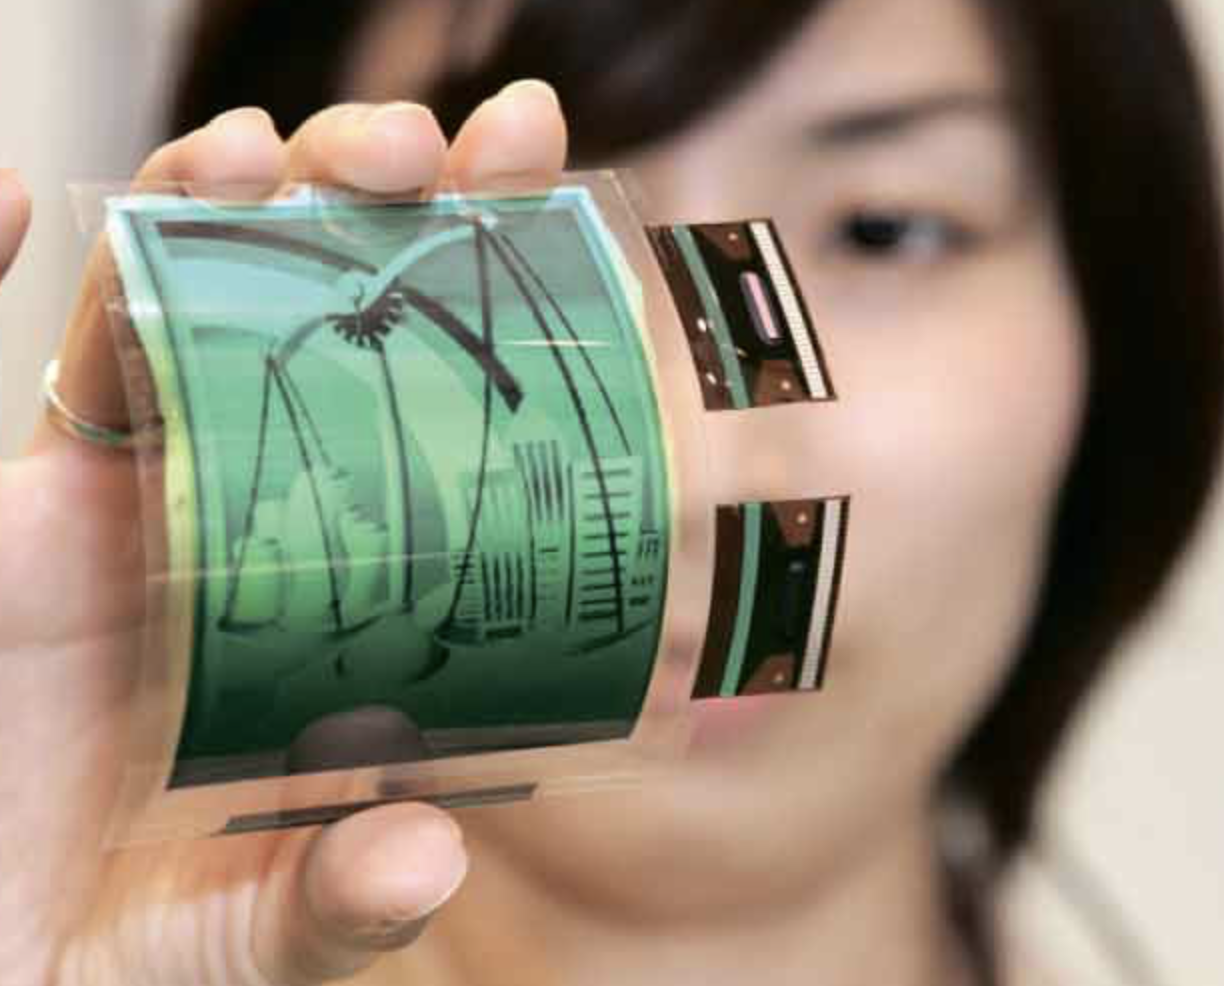 Samsung Joins the Flexible Display Wars